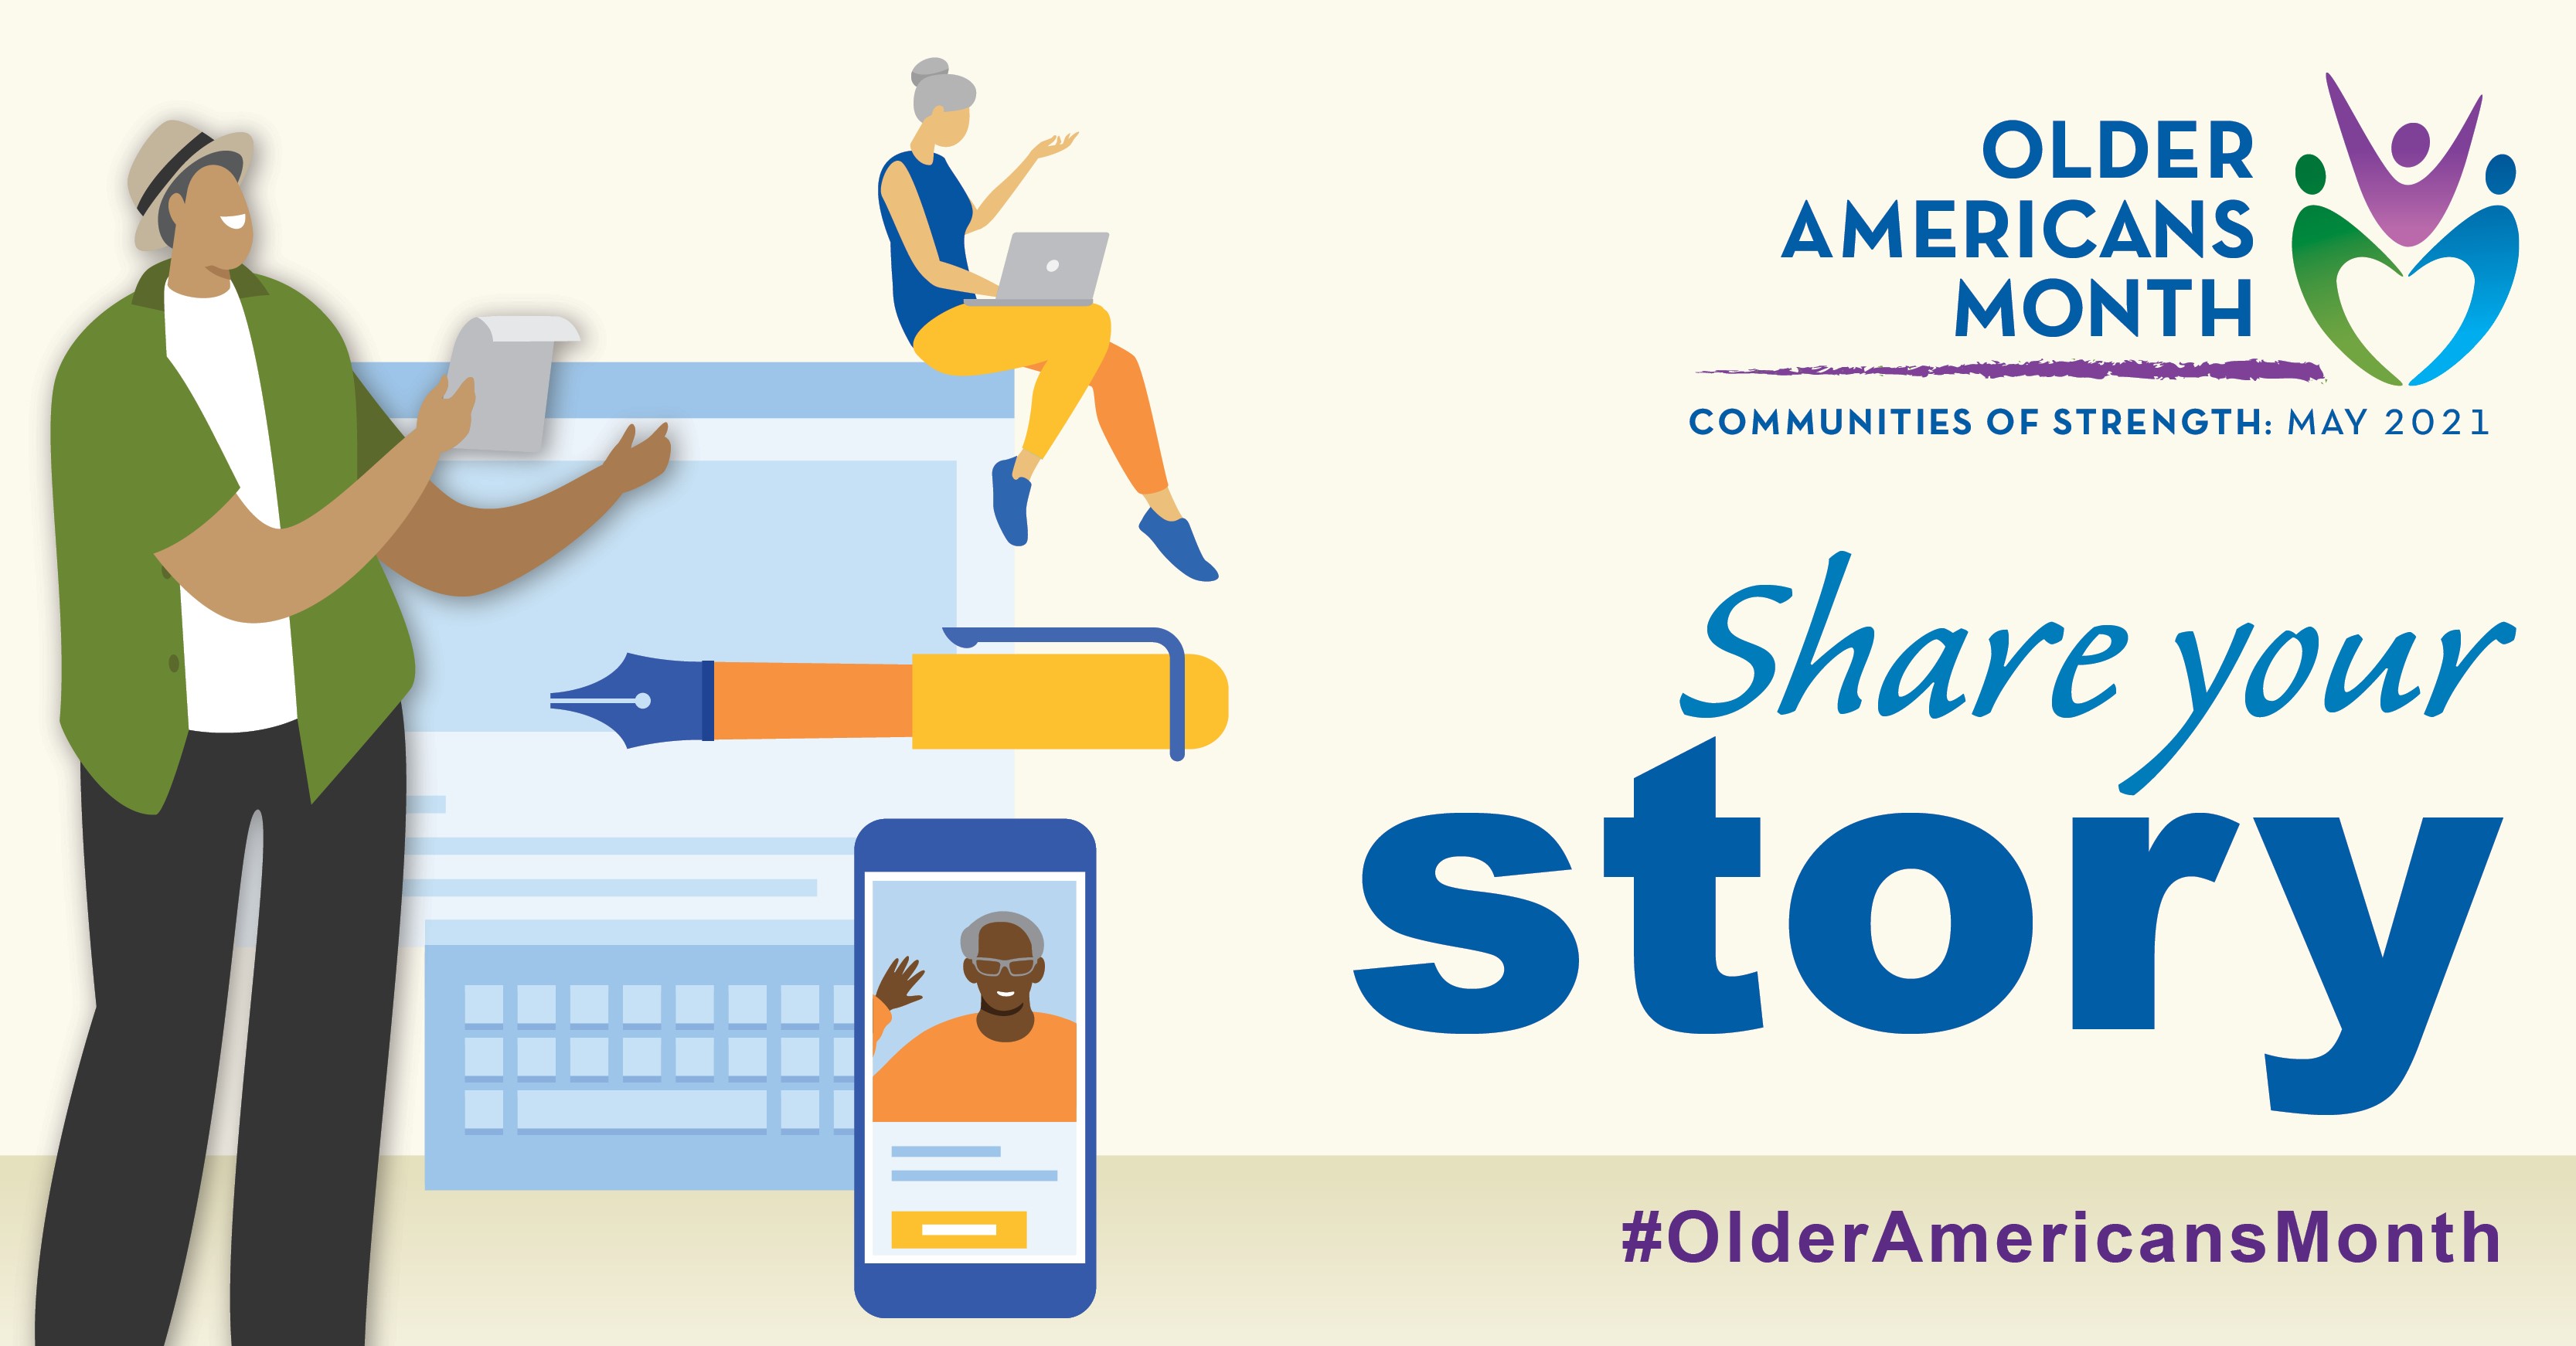 Social Media Graphic: Communities of Strength, Older Americans Month, May 2021. Share your story. #OlderAmericansMonth